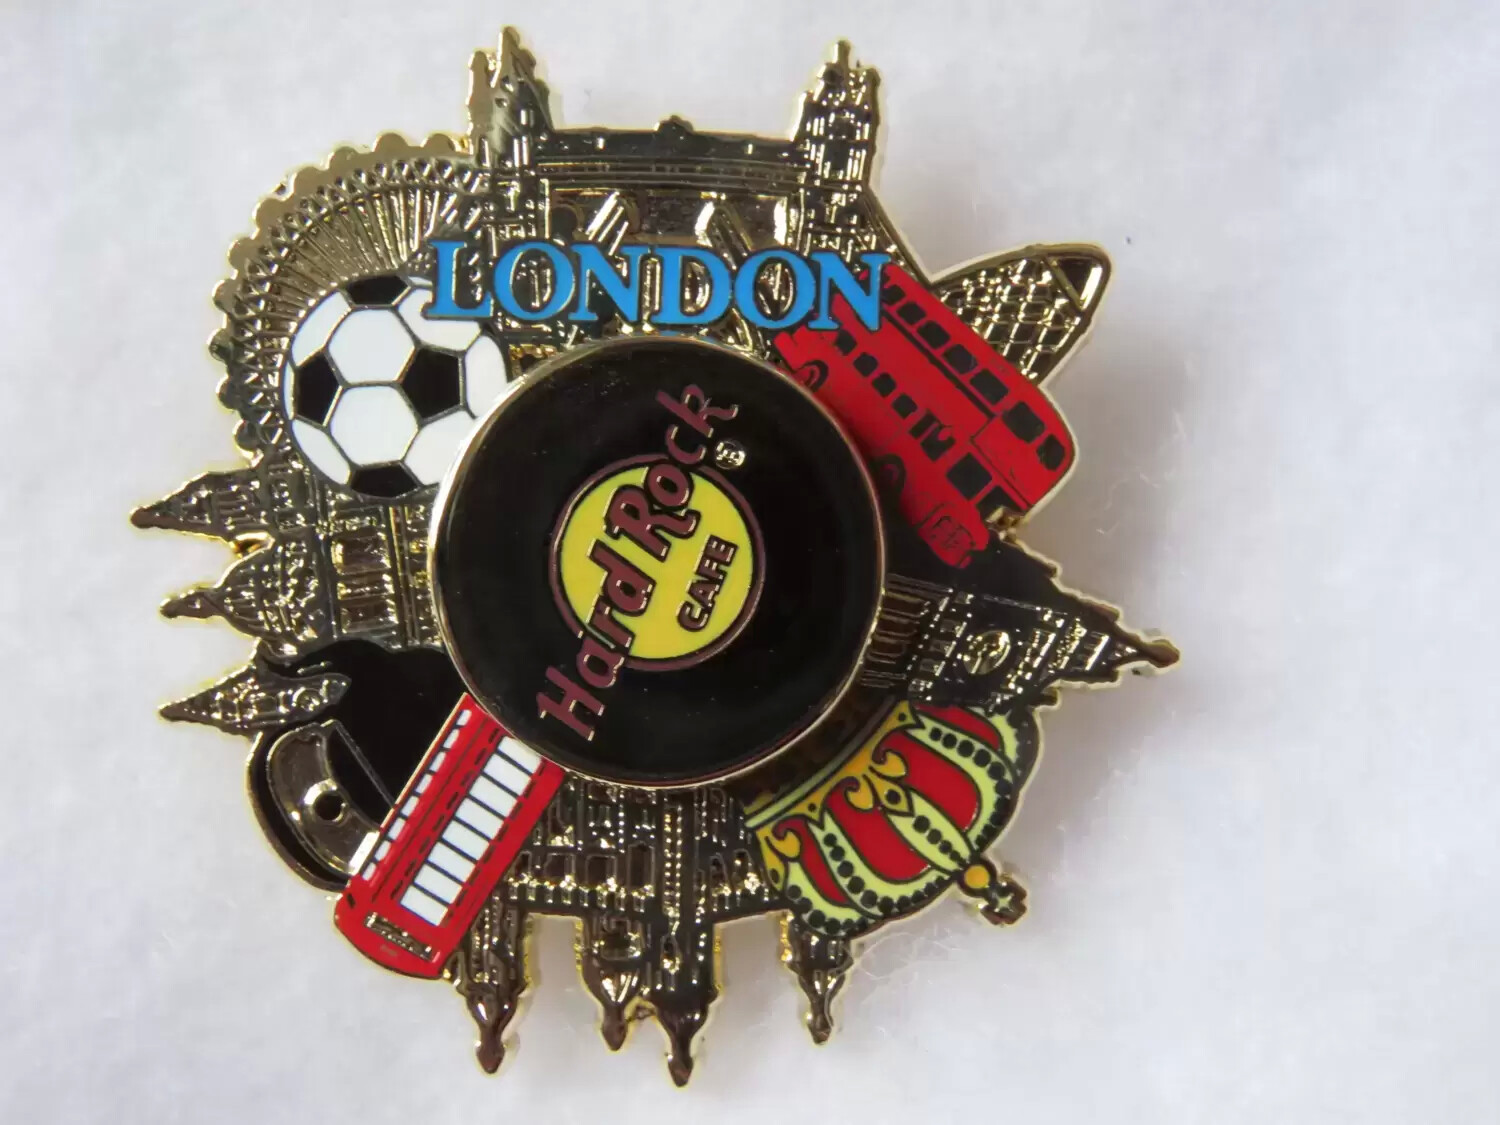 Spin City Piccadilly Circus - Hard Rock Cafe Pins